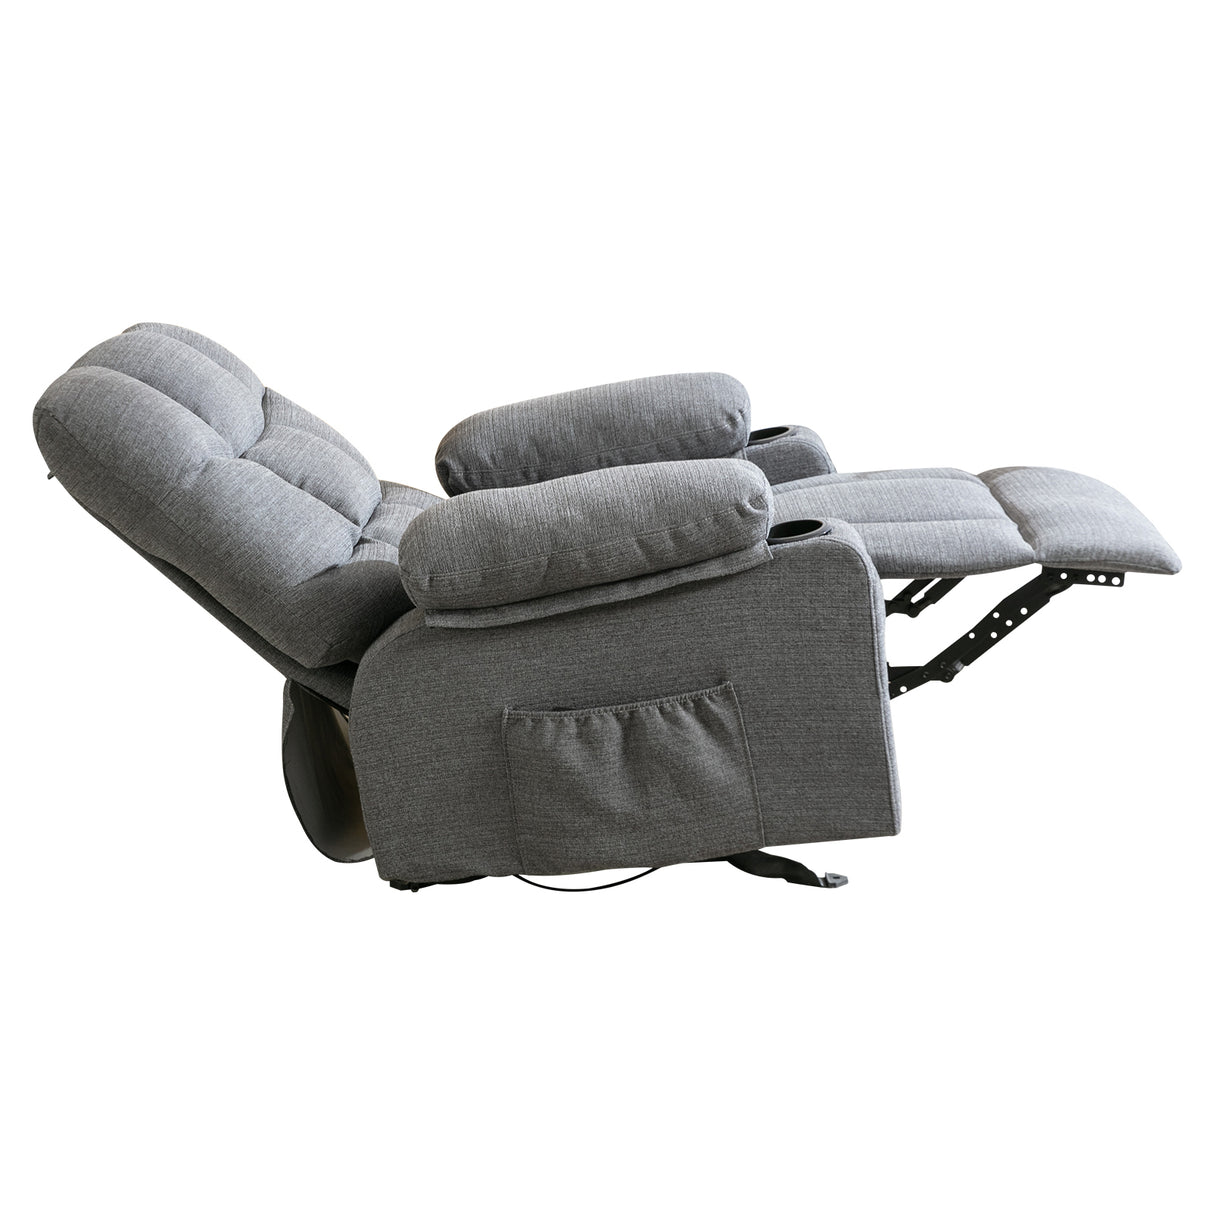 Vanbow.Recliner Chair Massage Heating sofa with USB and side pocket，2 Cup Holders (SMOKYGREY) Home Elegance USA